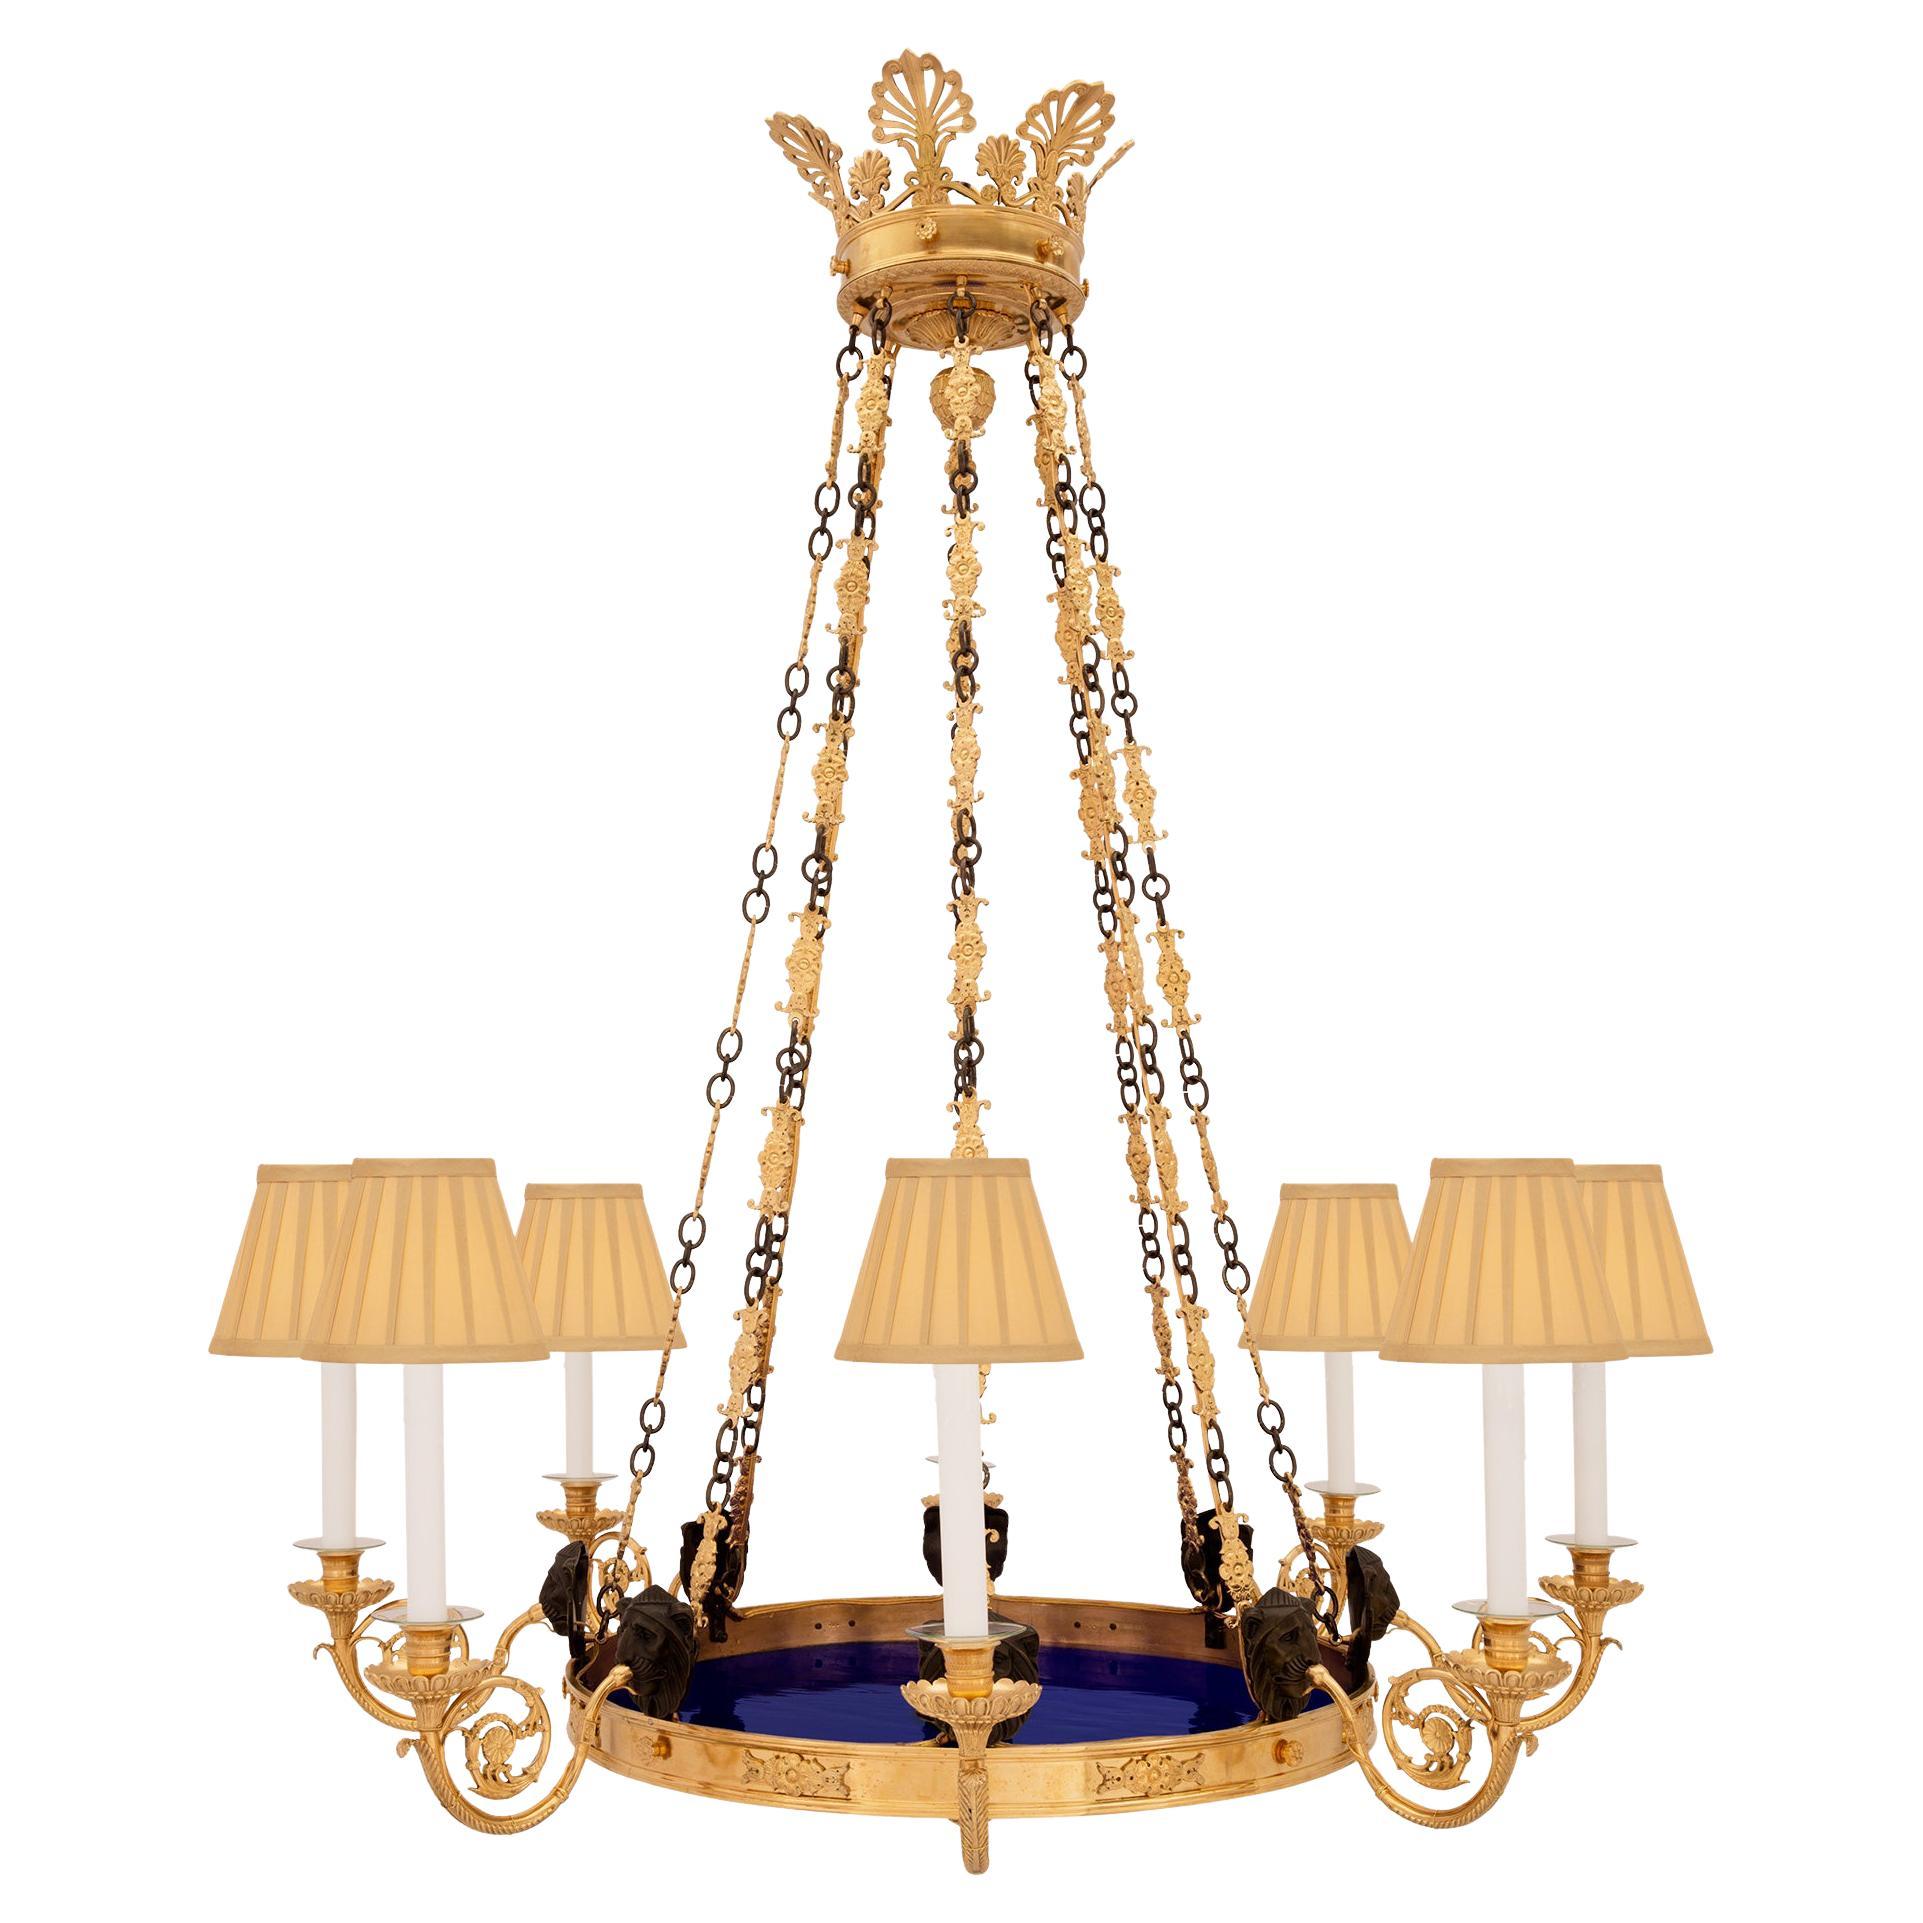 Russian 19th Century Neoclassical Style Bronze, Ormolu and Glass Chandelier